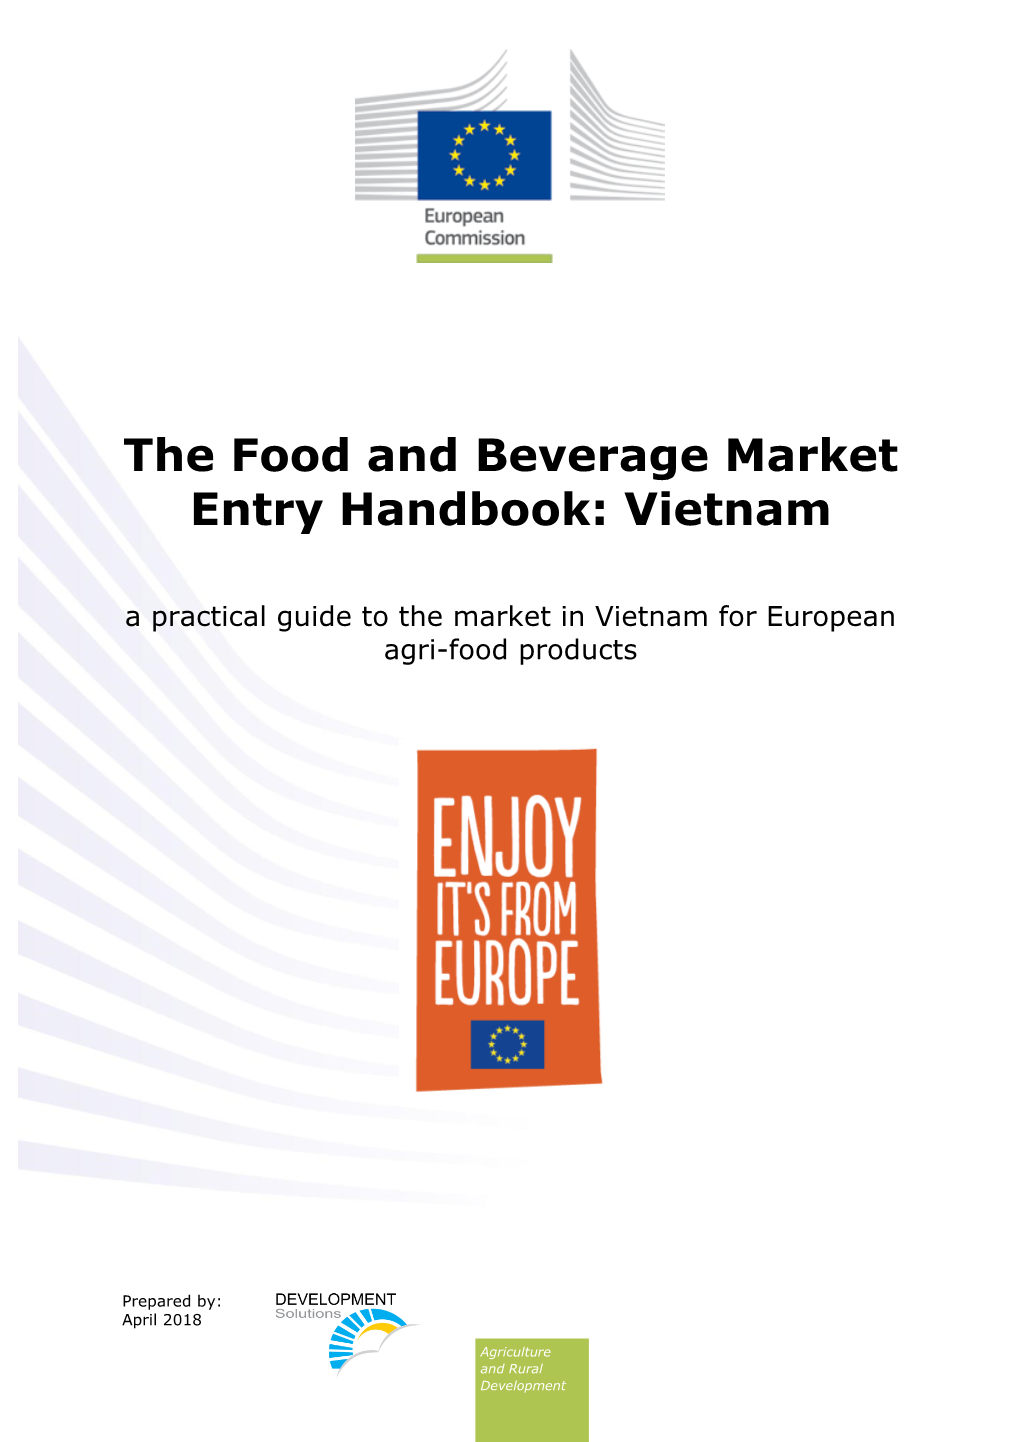 Vietnam a Practical Guide to the Market in Vietnam for European Agri-Food Products